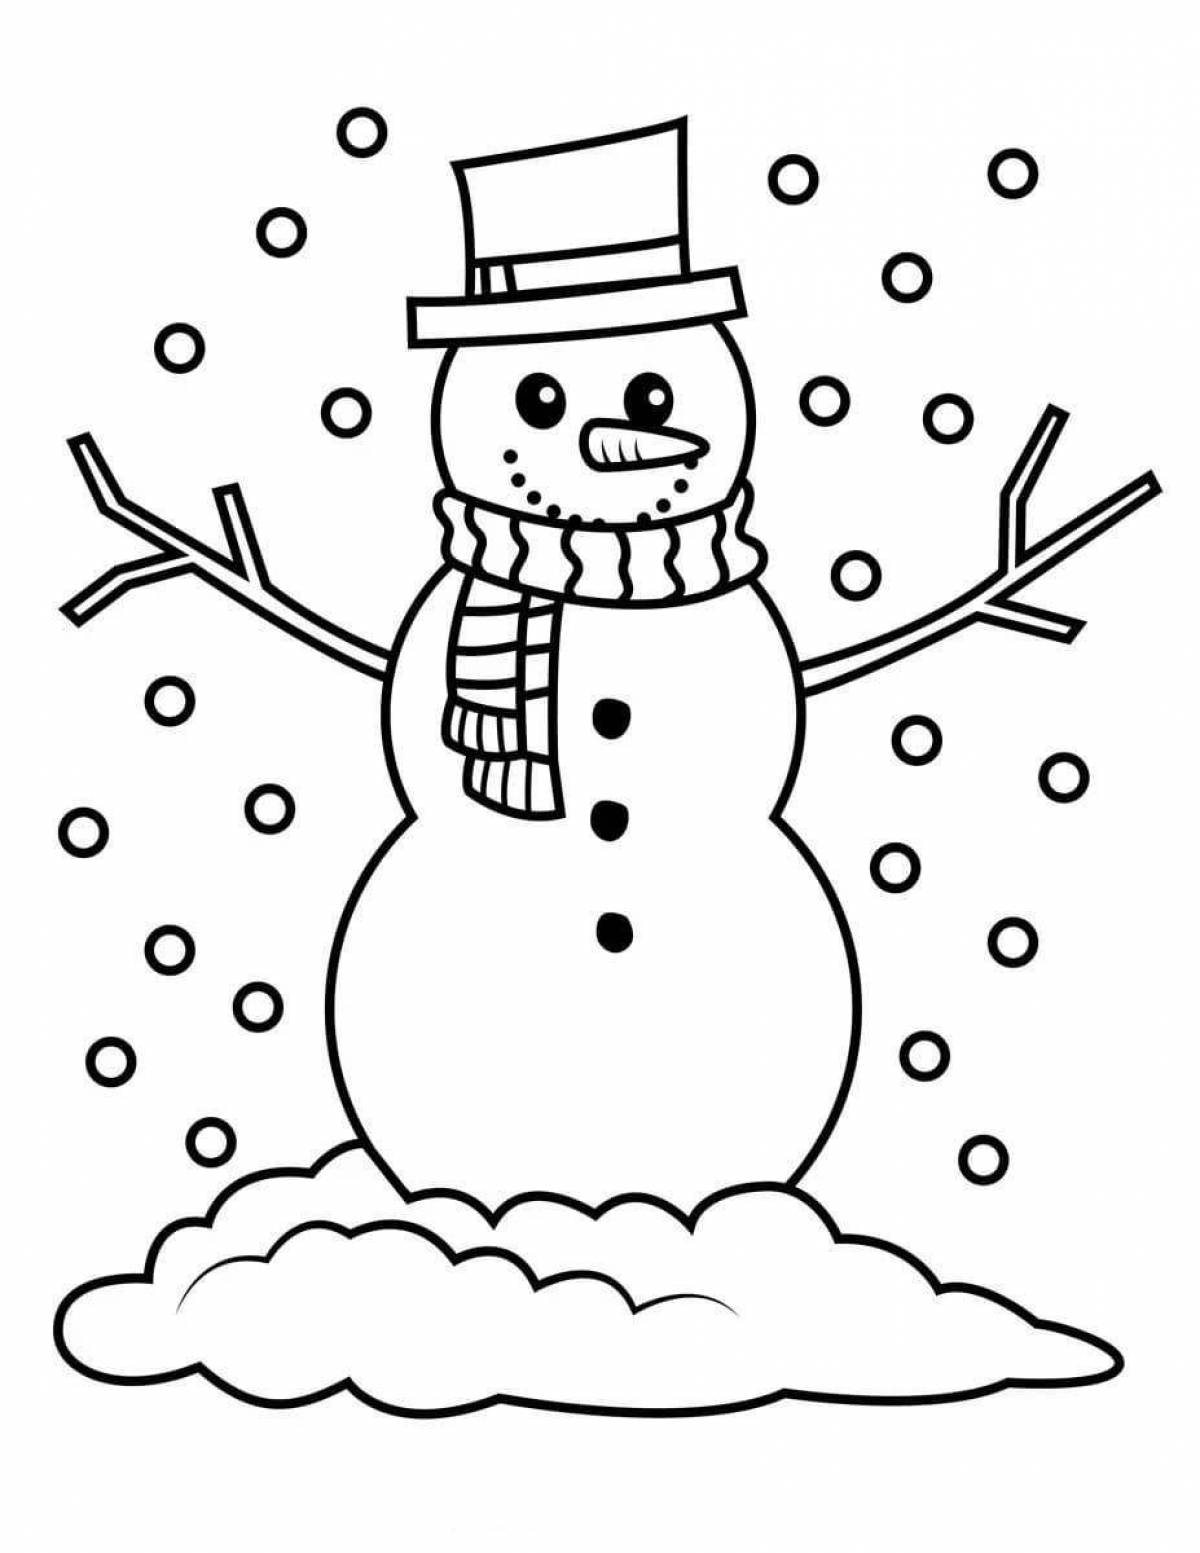 A fascinating snowman coloring book for children 4-5 years old